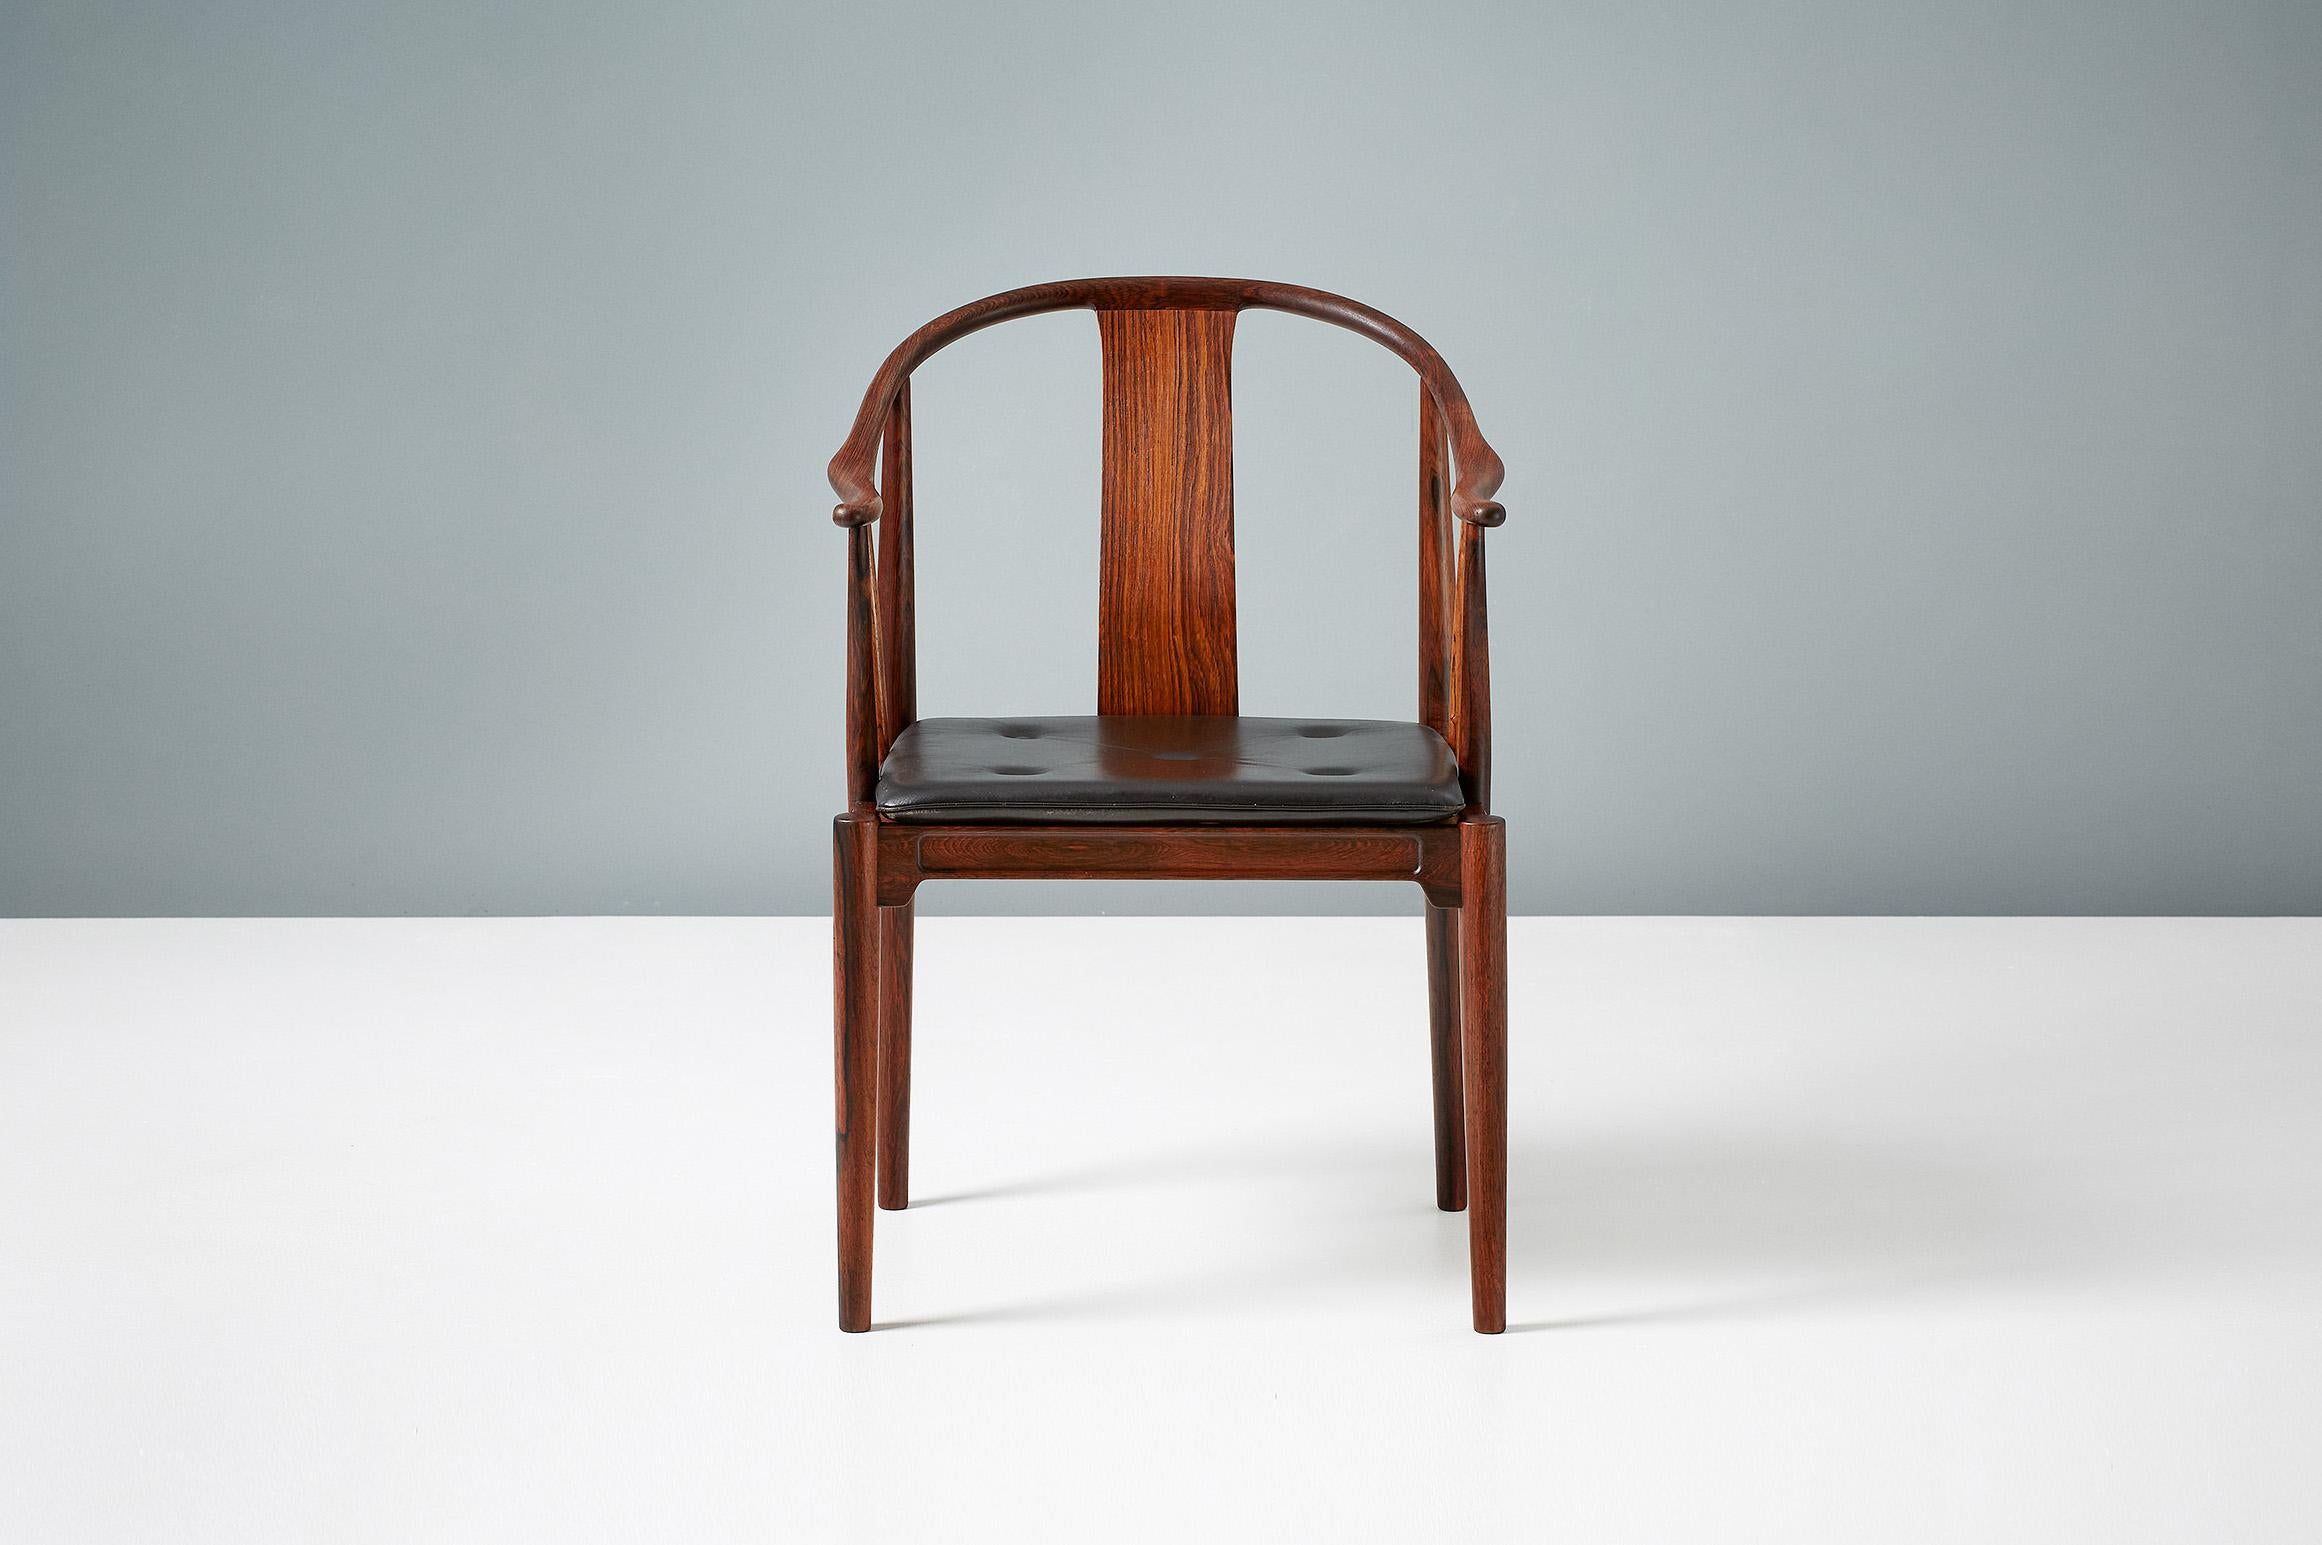 Hans J. Wegner

FH 4283 China chair, 1944

Produced by Fritz Hansen in Denmark this version in exquisite Brazilian rosewood is an incredibly rare version of this iconic design made in very limited quantities in the 1960s. The chair retains its